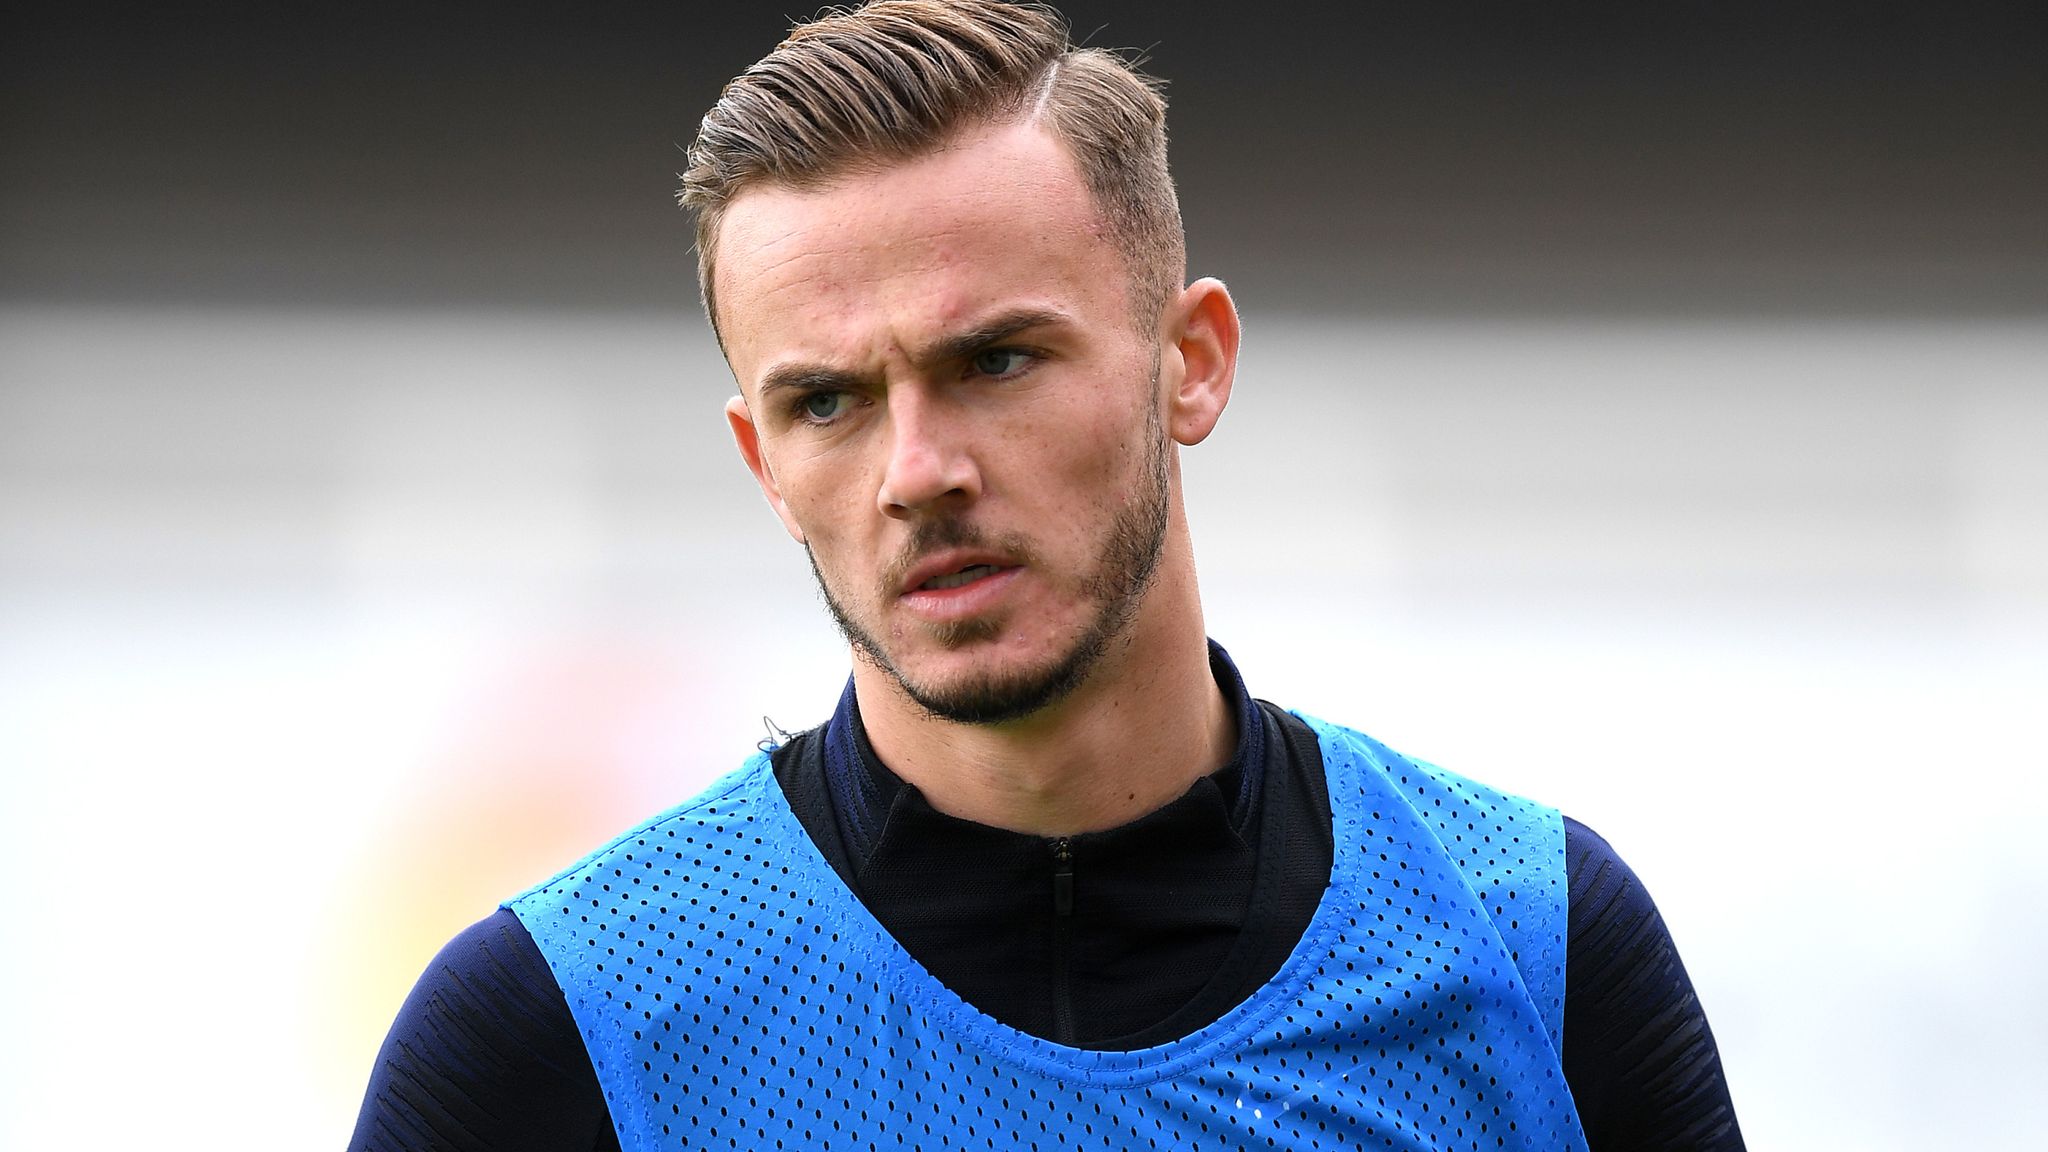 Midfielder Maddison extends stay at Leicester City until 2024